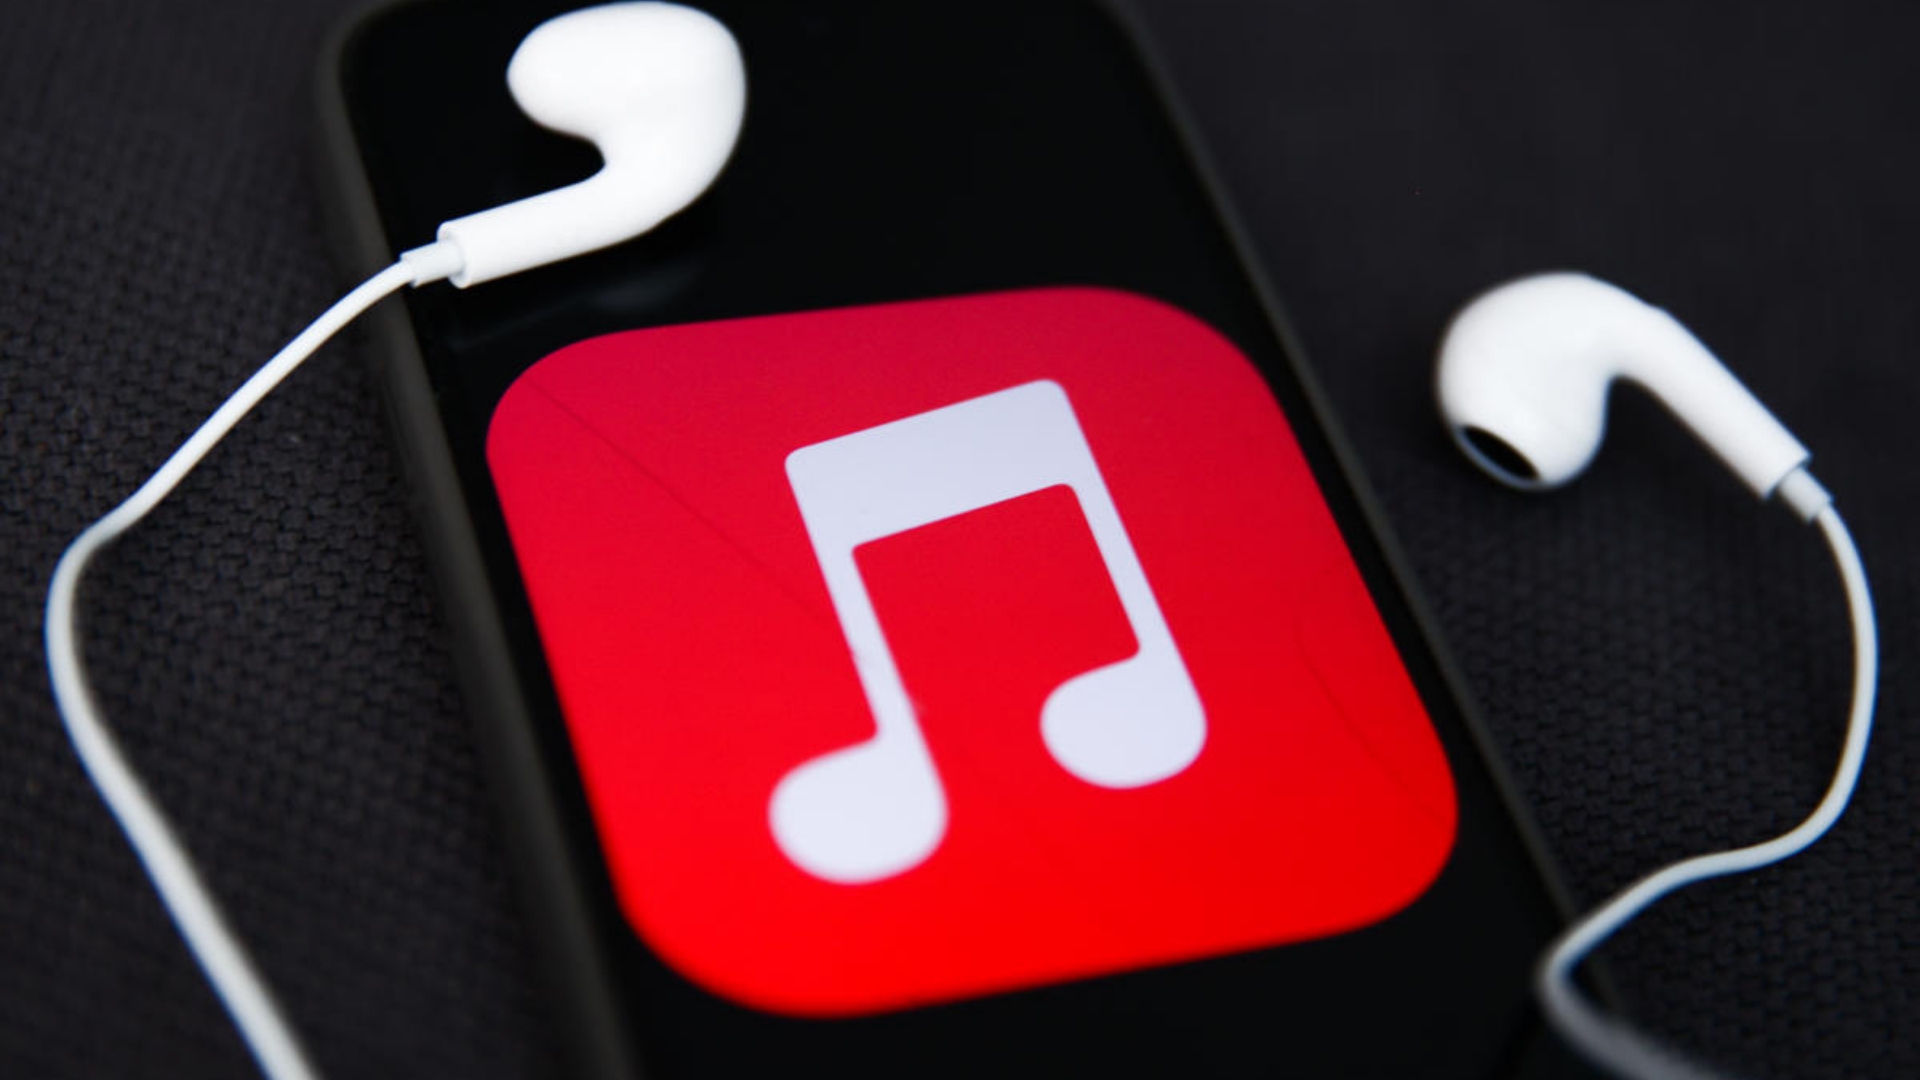 Apple informs musicians that using spatial audio can increase their revenue significantly.